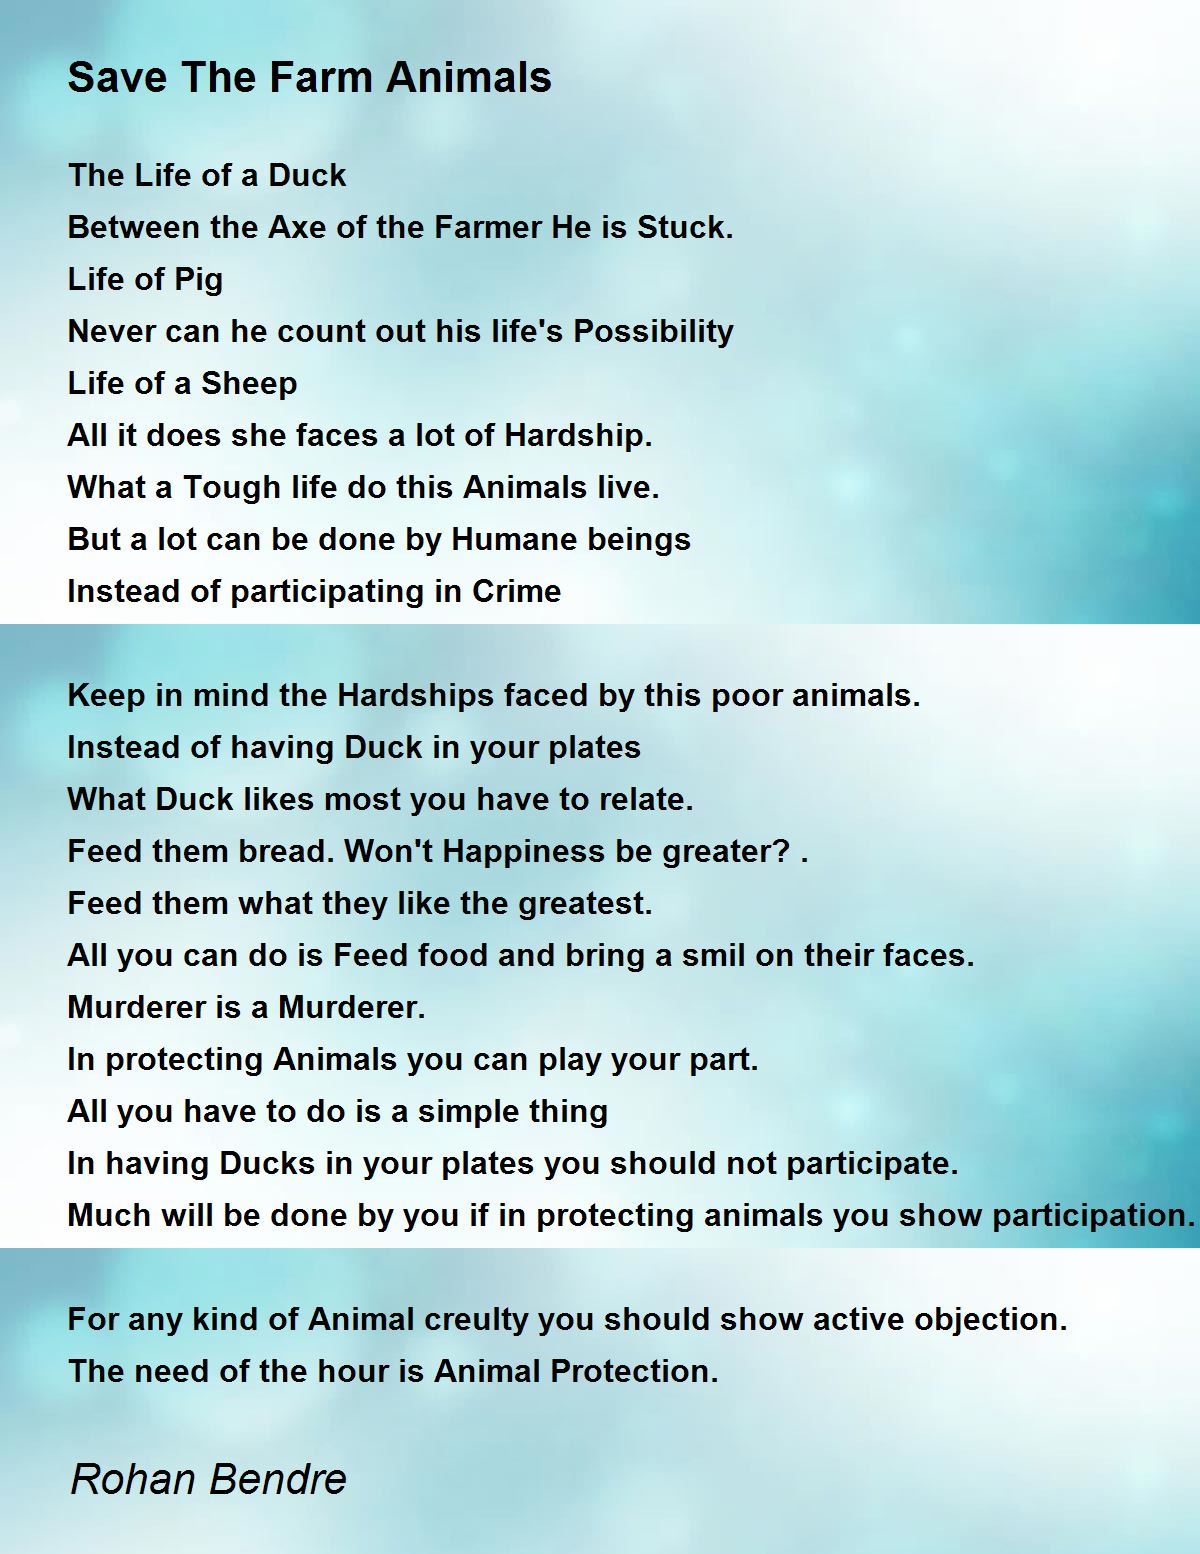 Save The Farm Animals - Save The Farm Animals Poem by Rohan Bendre